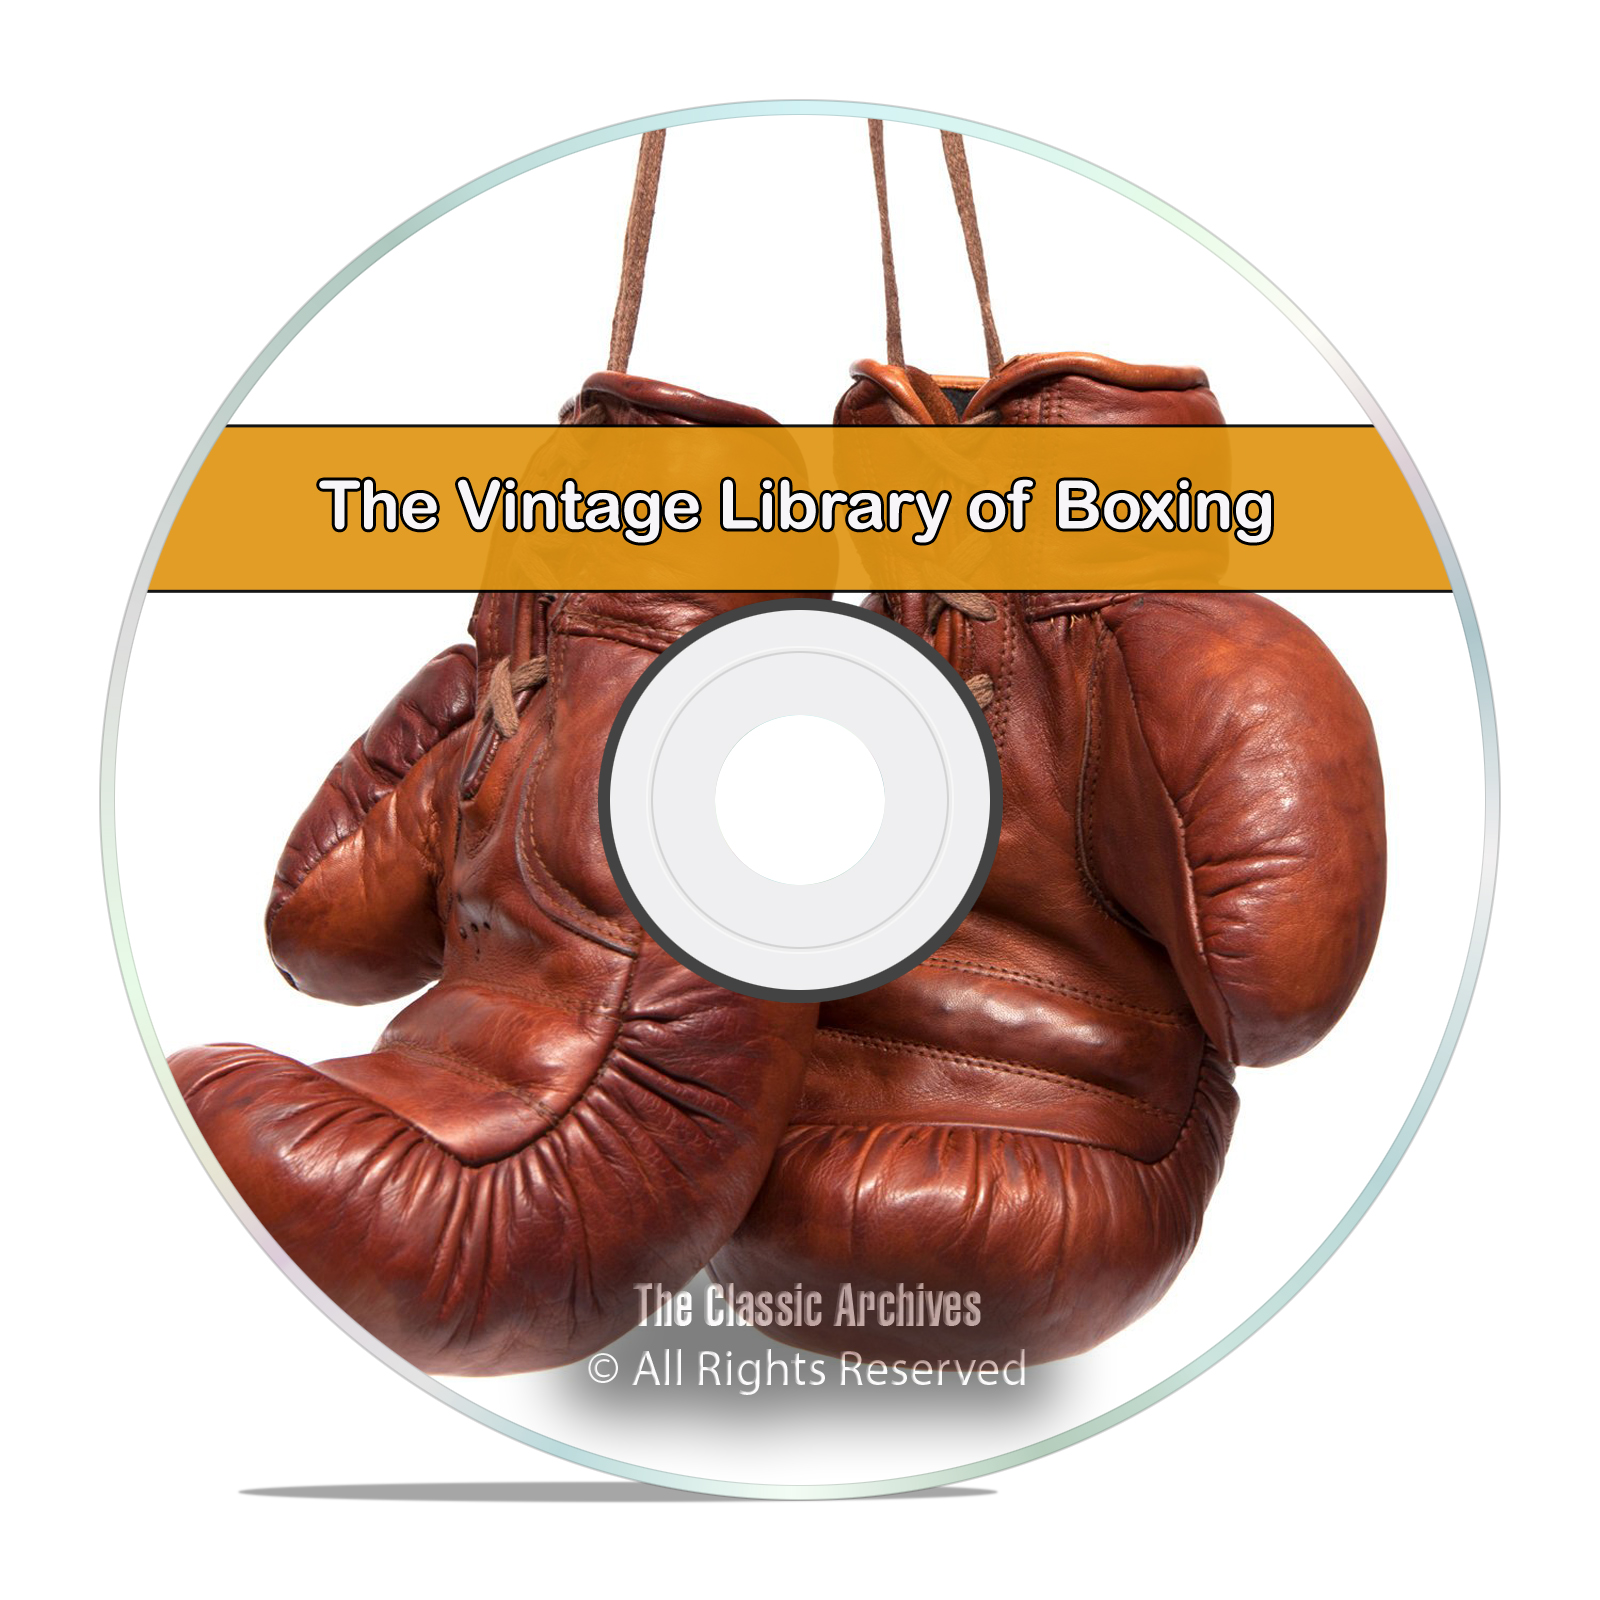 Complete Library on Boxing, 50 Books, Self Defense, Train, History PDF CD